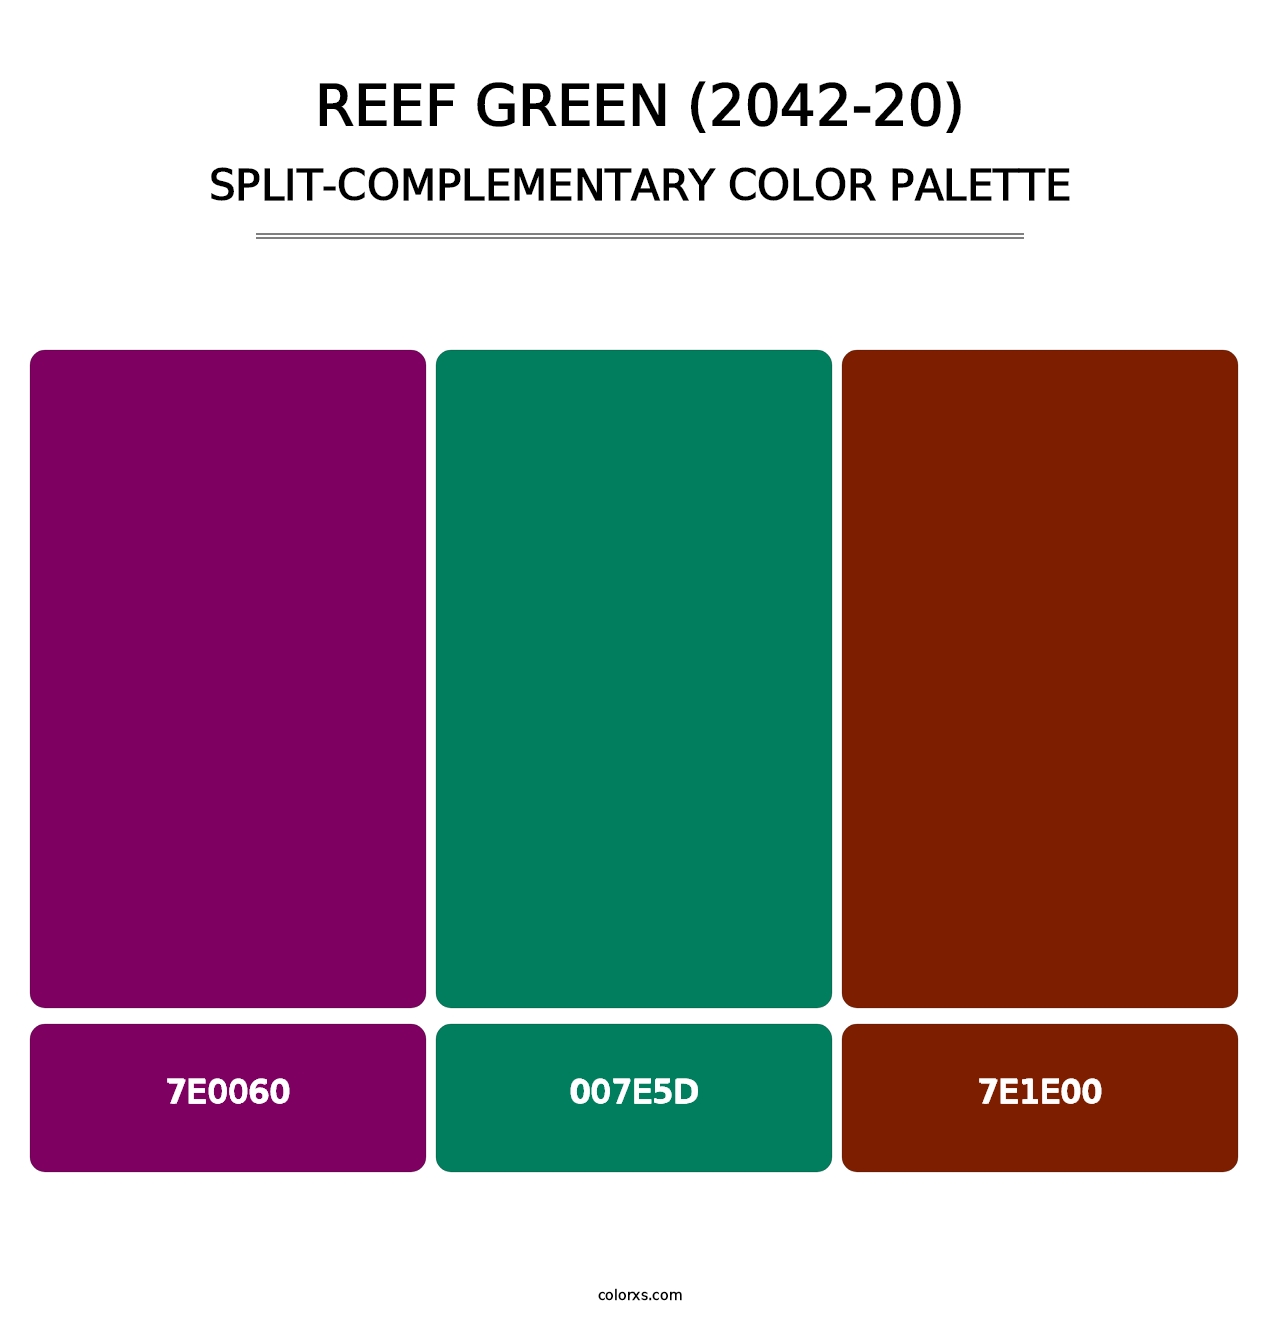 Reef Green (2042-20) - Split-Complementary Color Palette